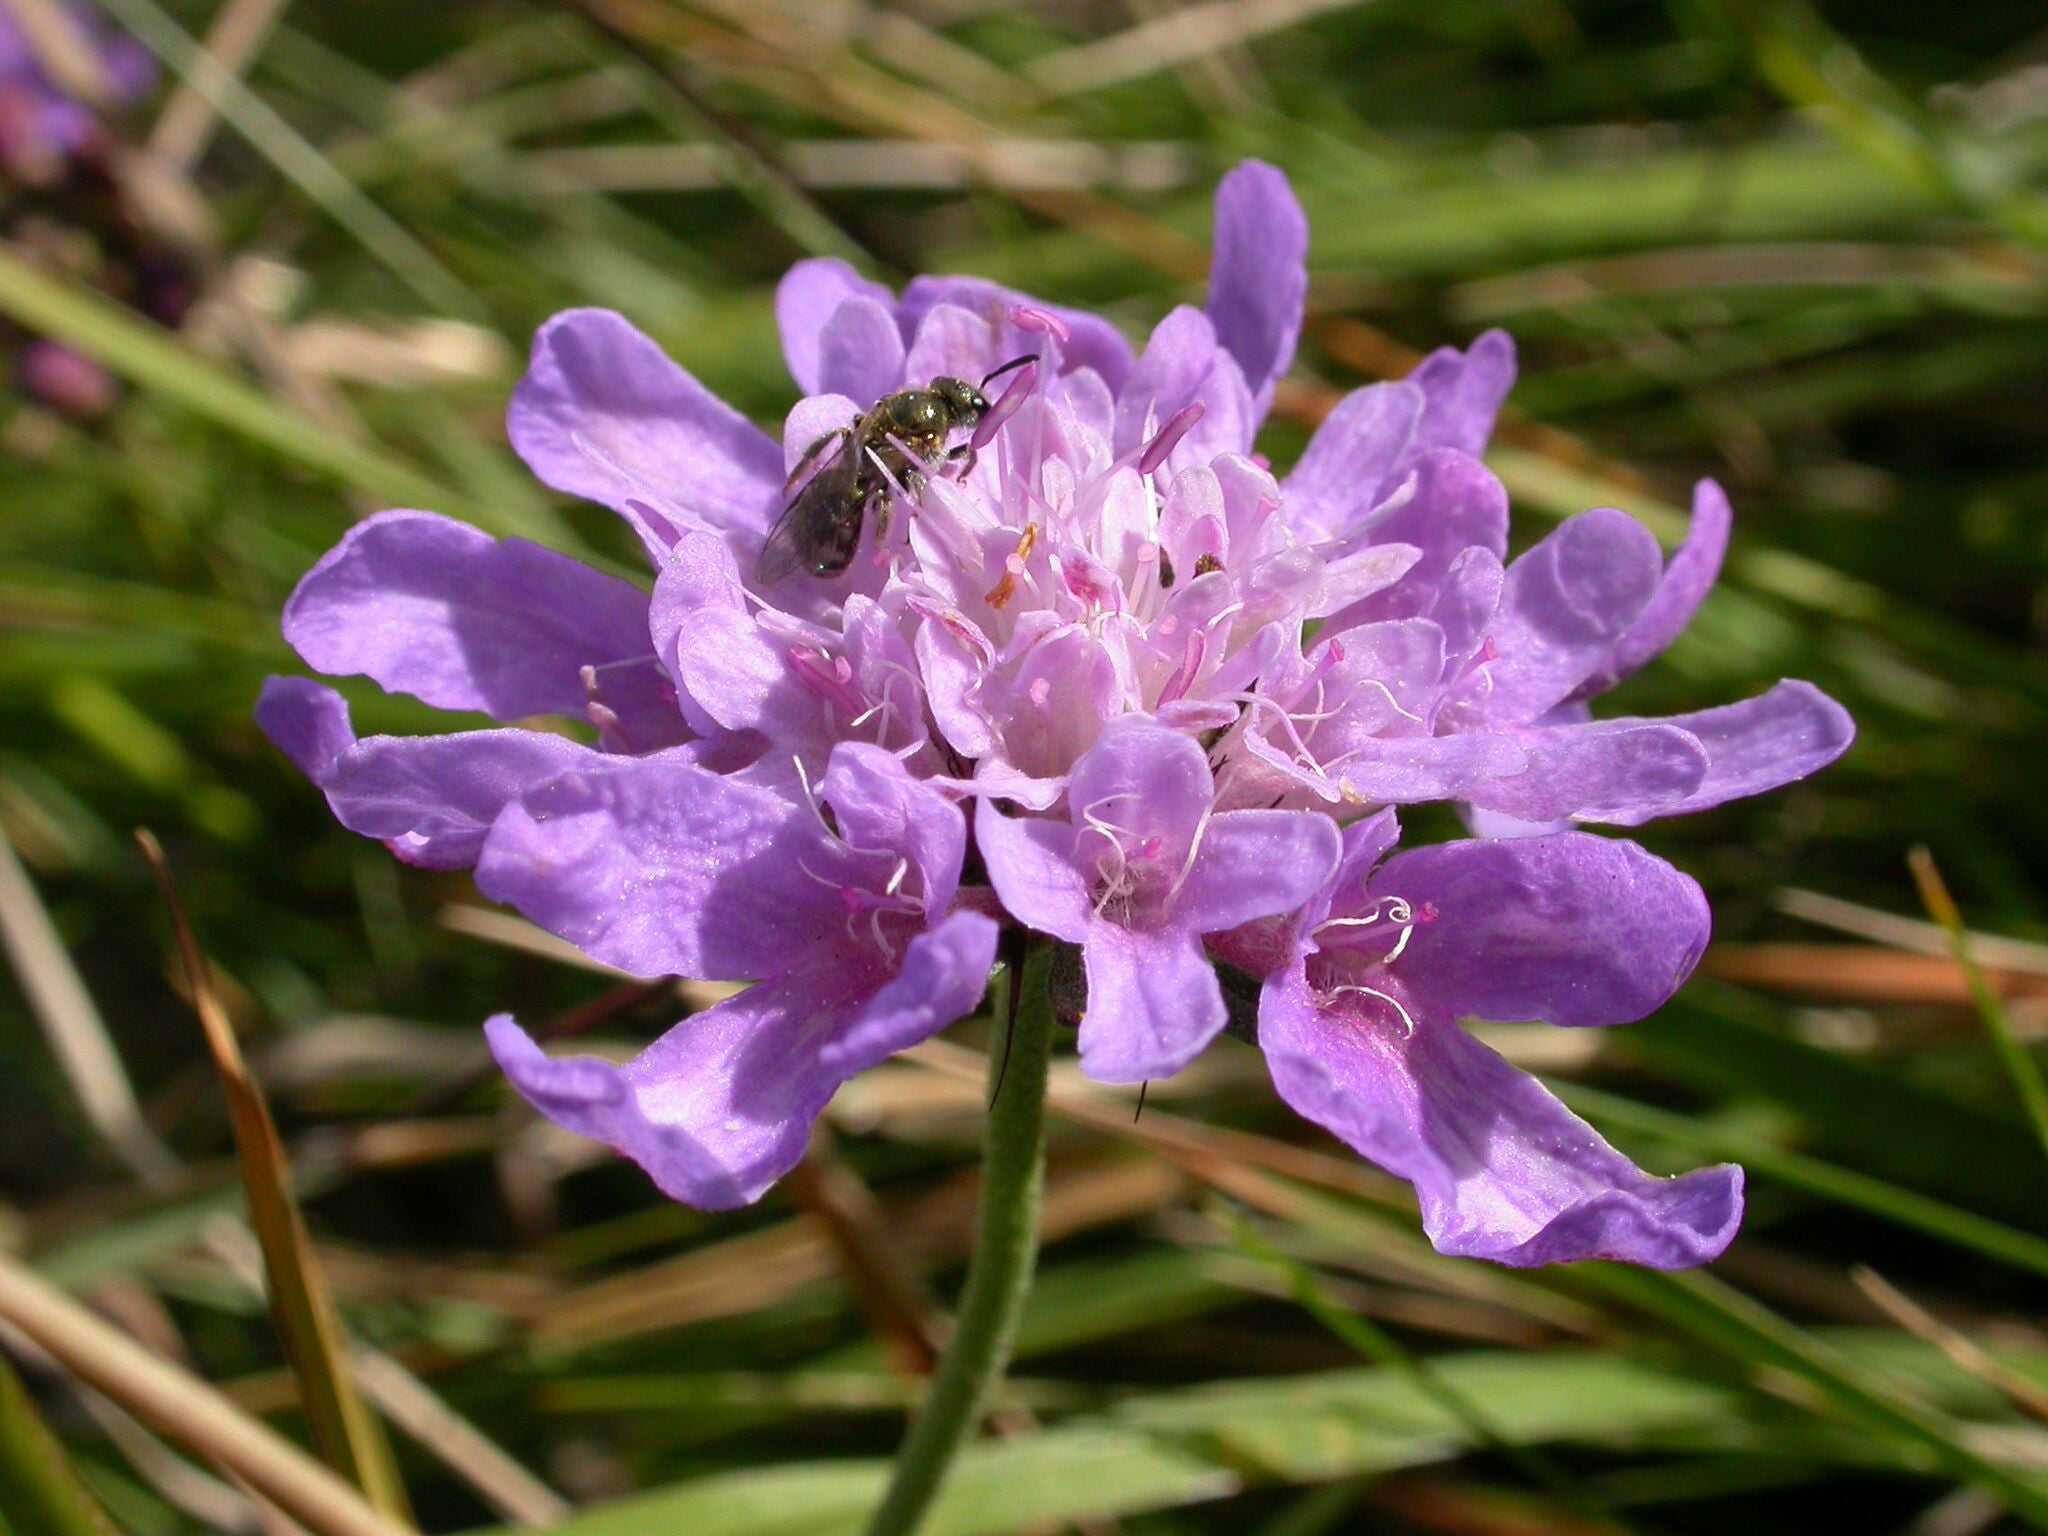 Nearly 1,400 species of pollinators and other insects rely on meadow plants for their survival